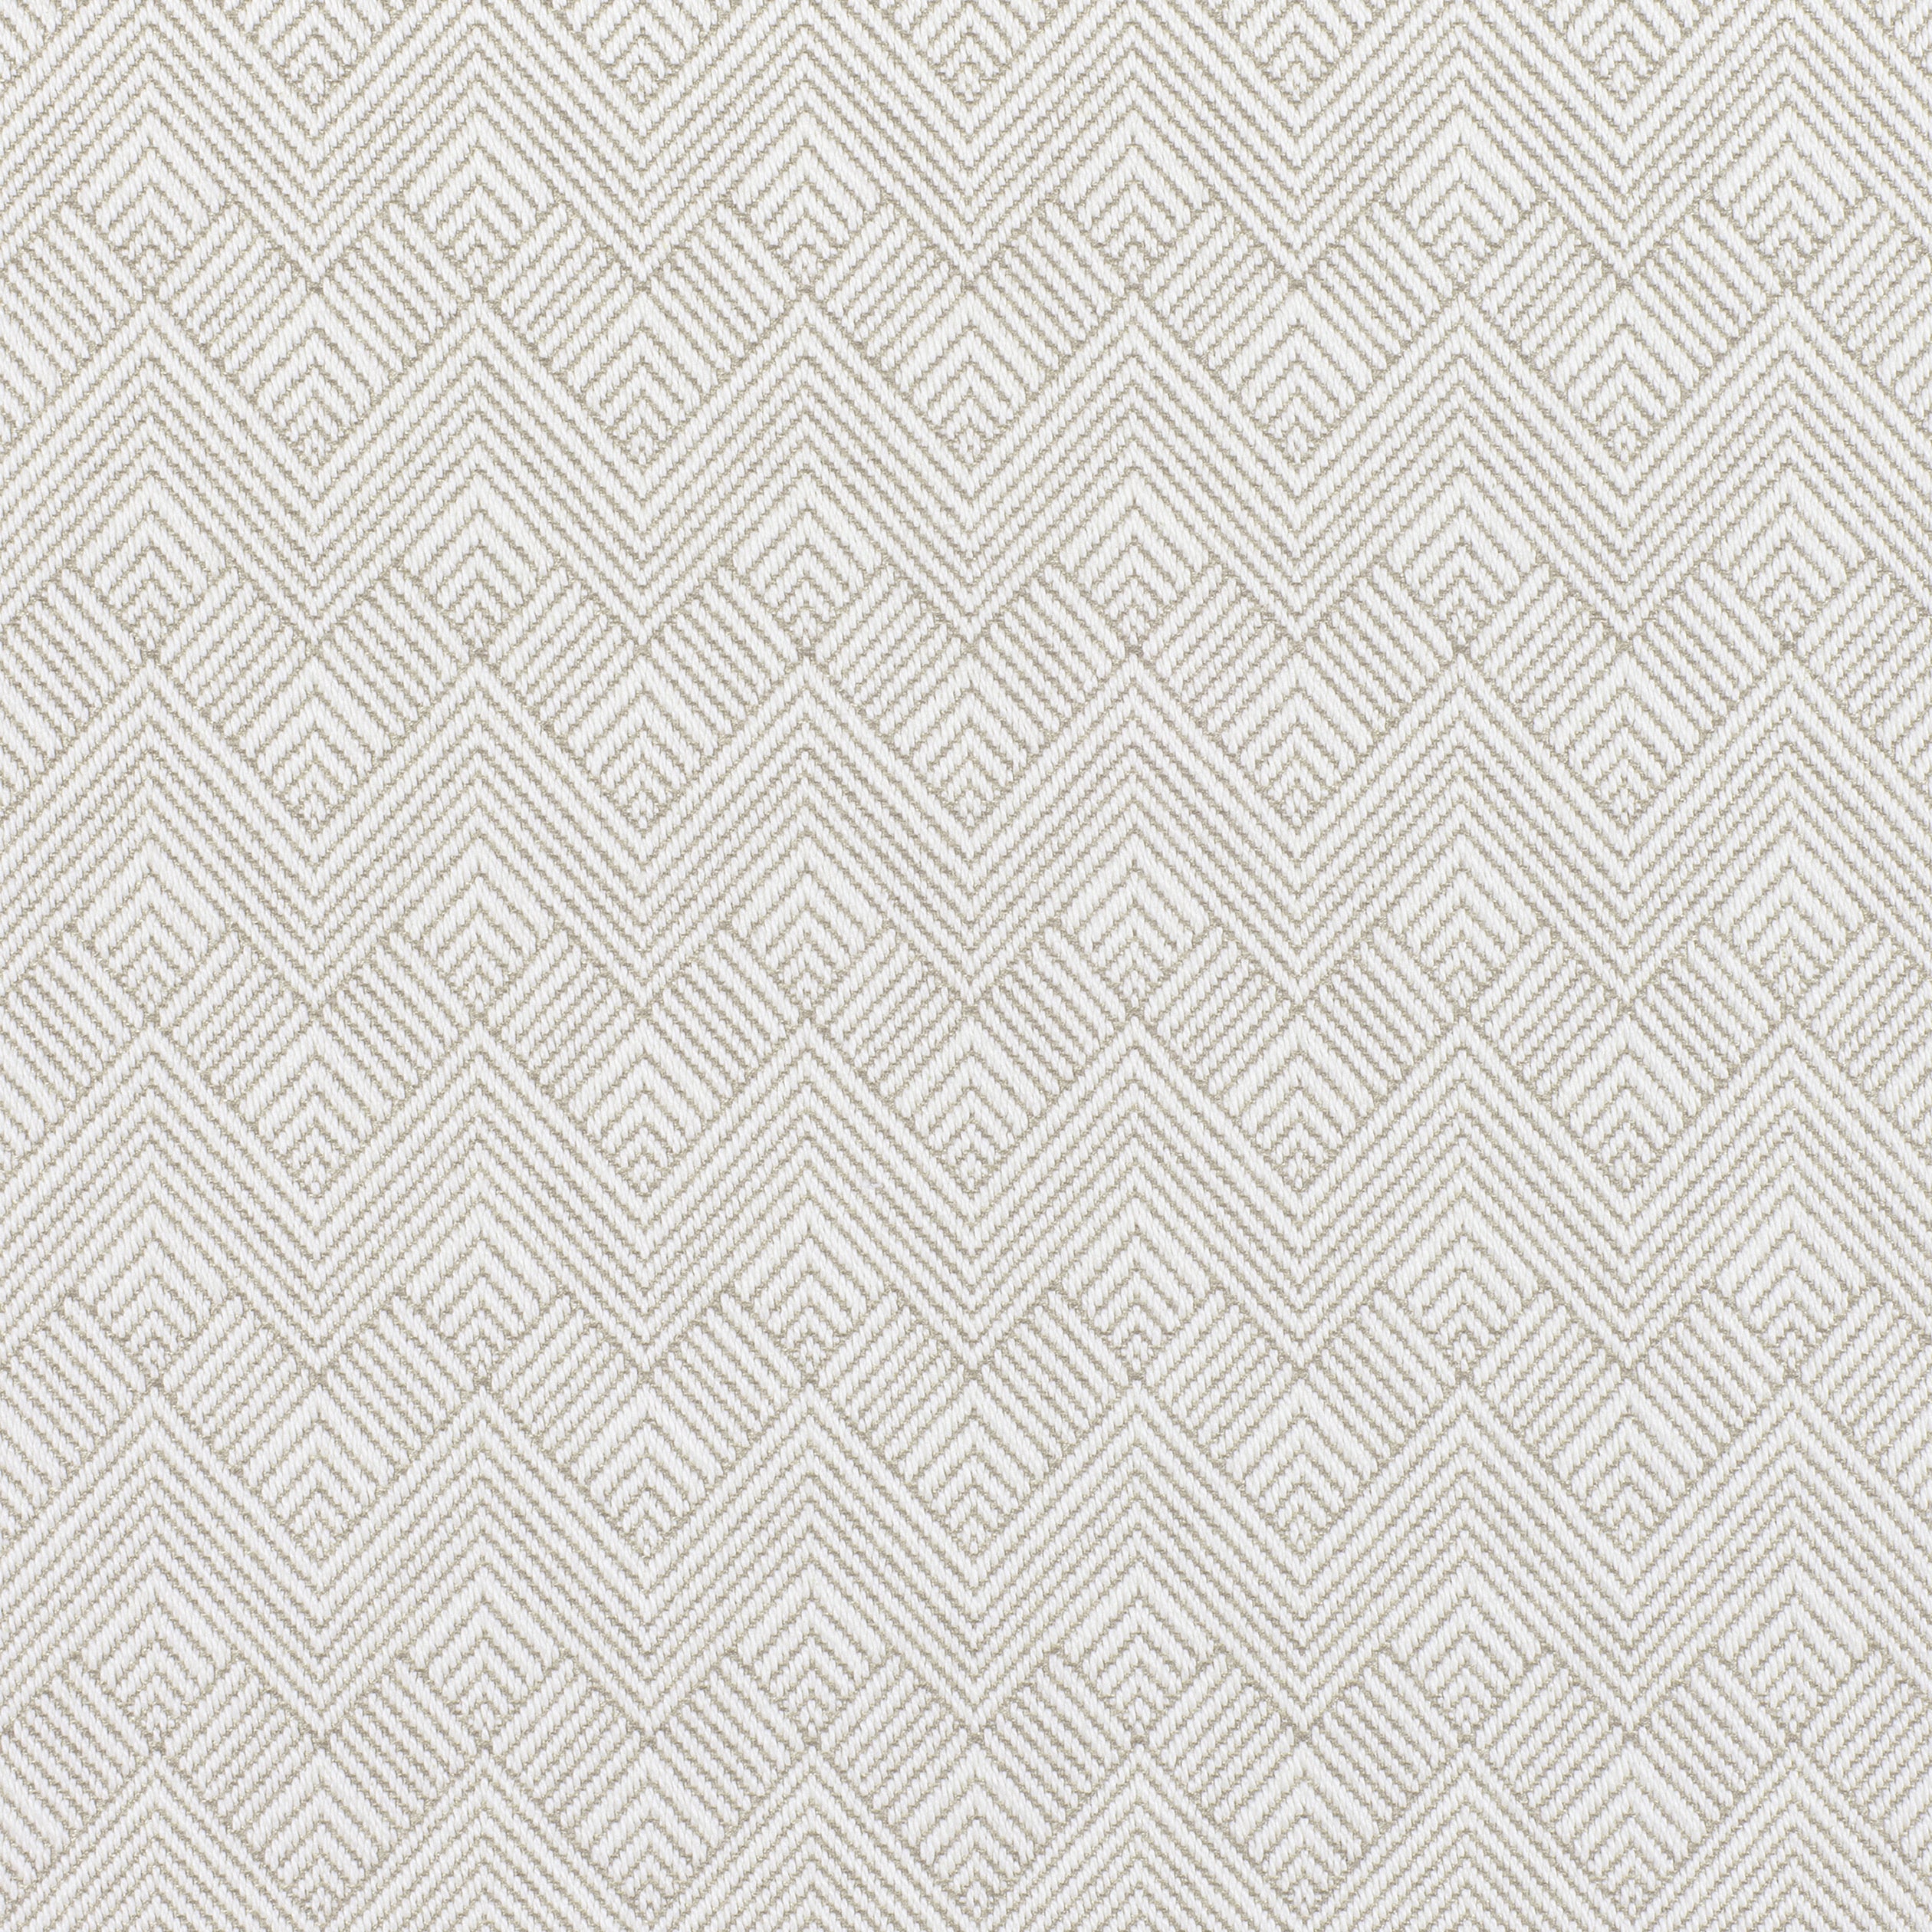 Maddox fabric in jute color - pattern number W73333 - by Thibaut in the Nomad collection